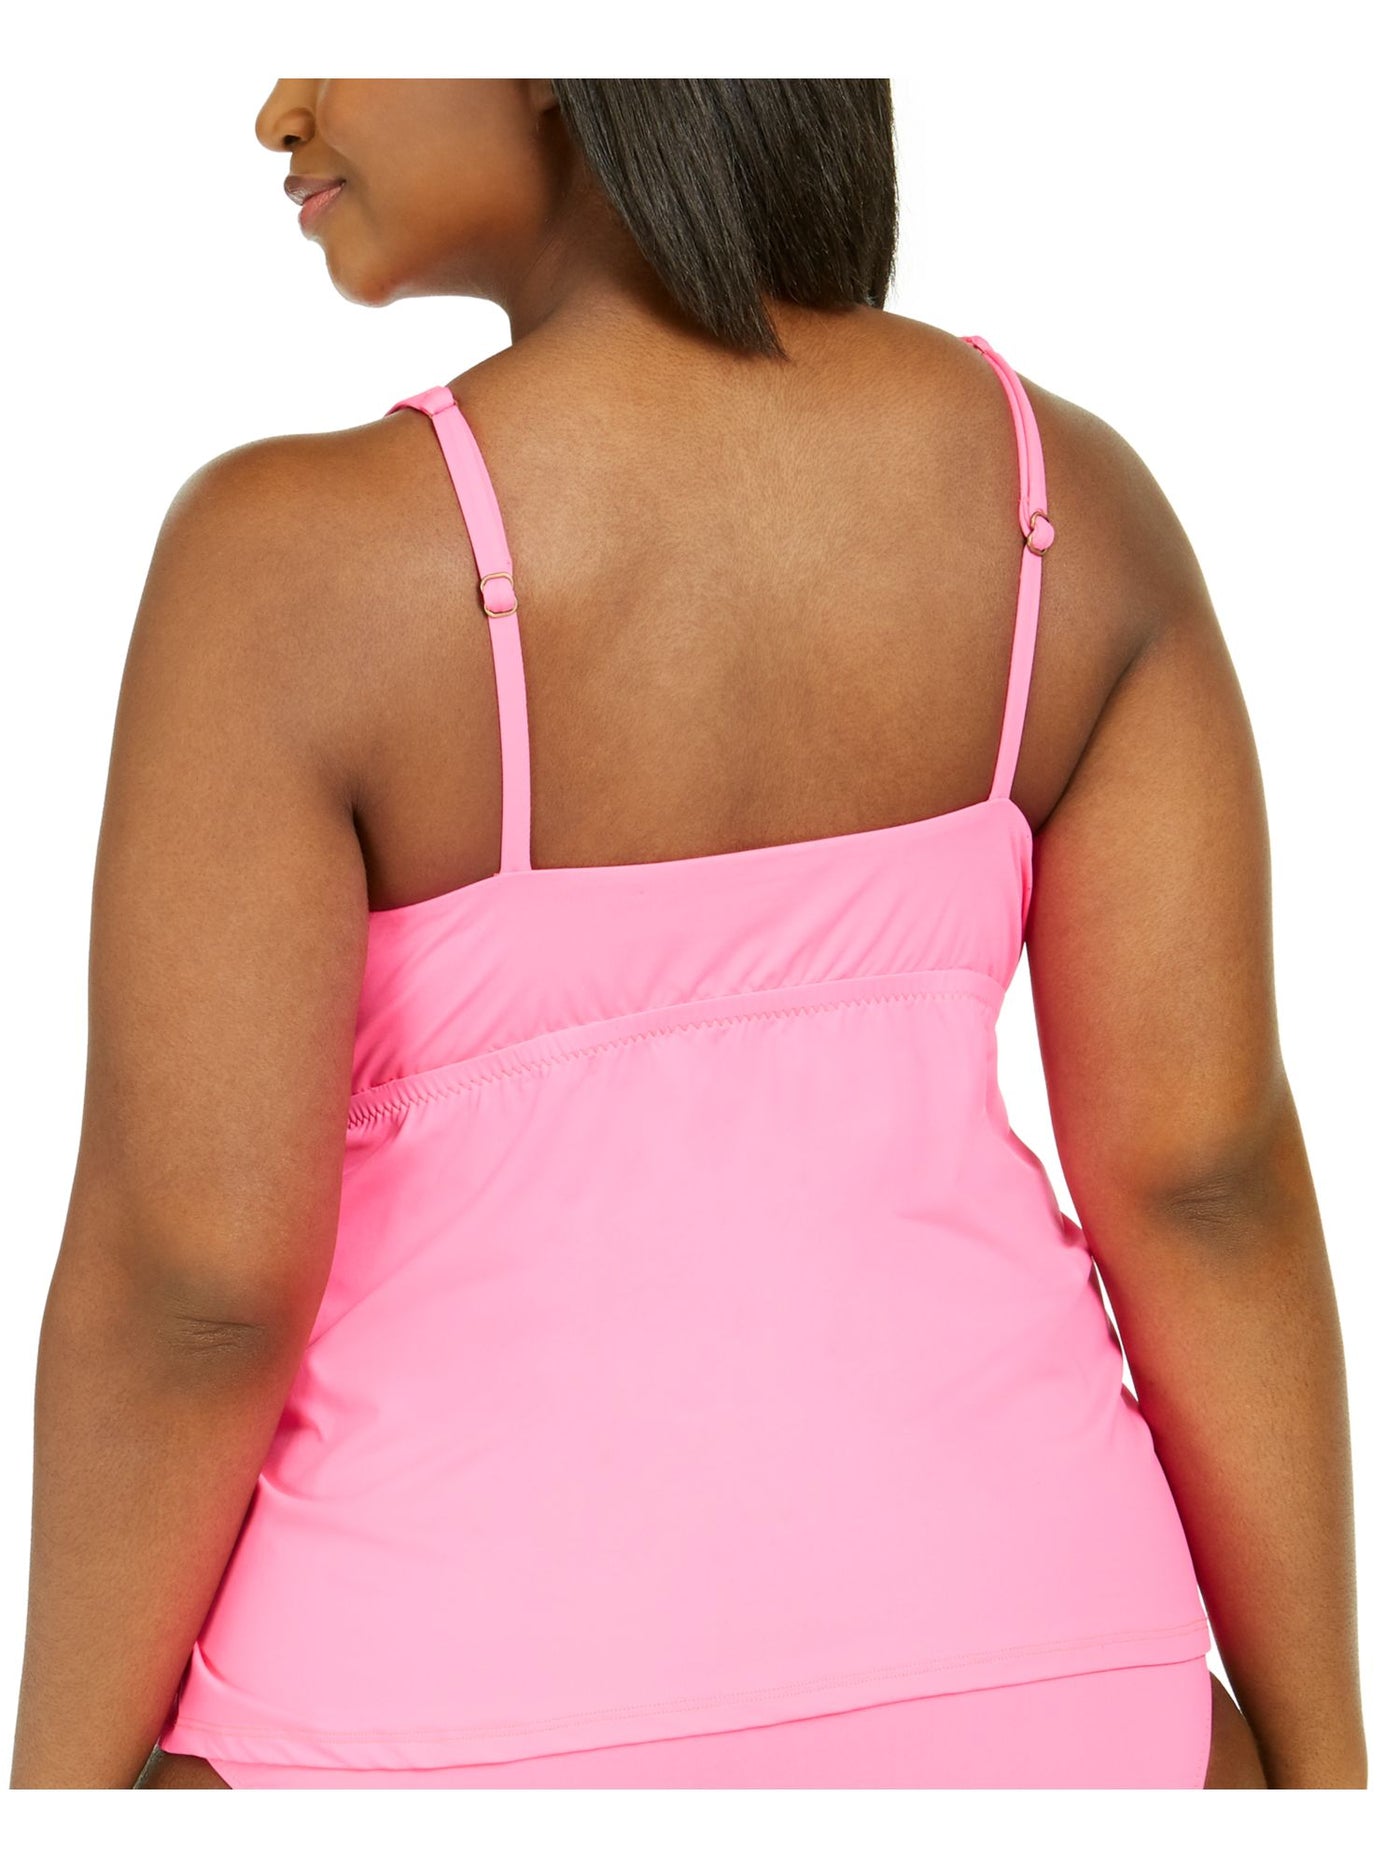 BECCA Women's Pink Stretch High Neck Removable Cups Lined Adjustable Cutout Color Code Tankini Swimsuit Top 1X